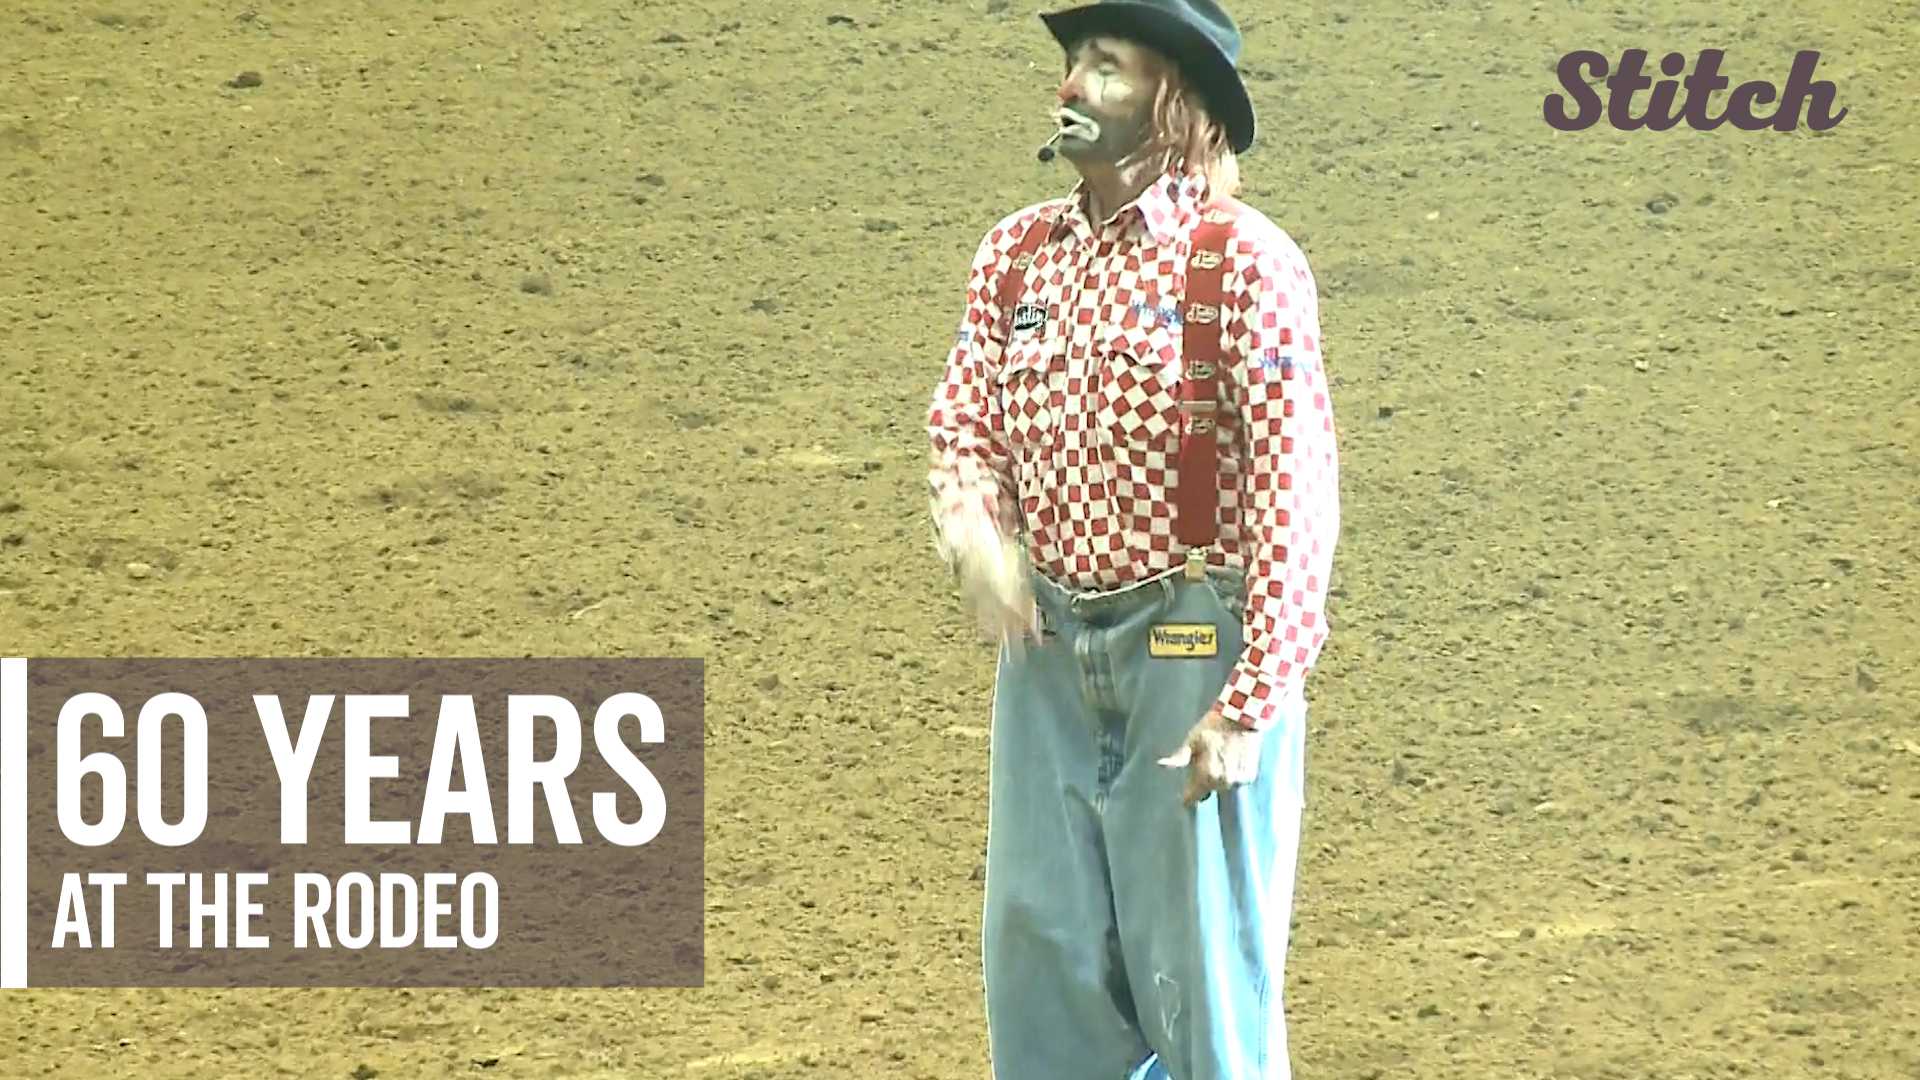 60-plus years in the rodeo and not slowing down anytime soon